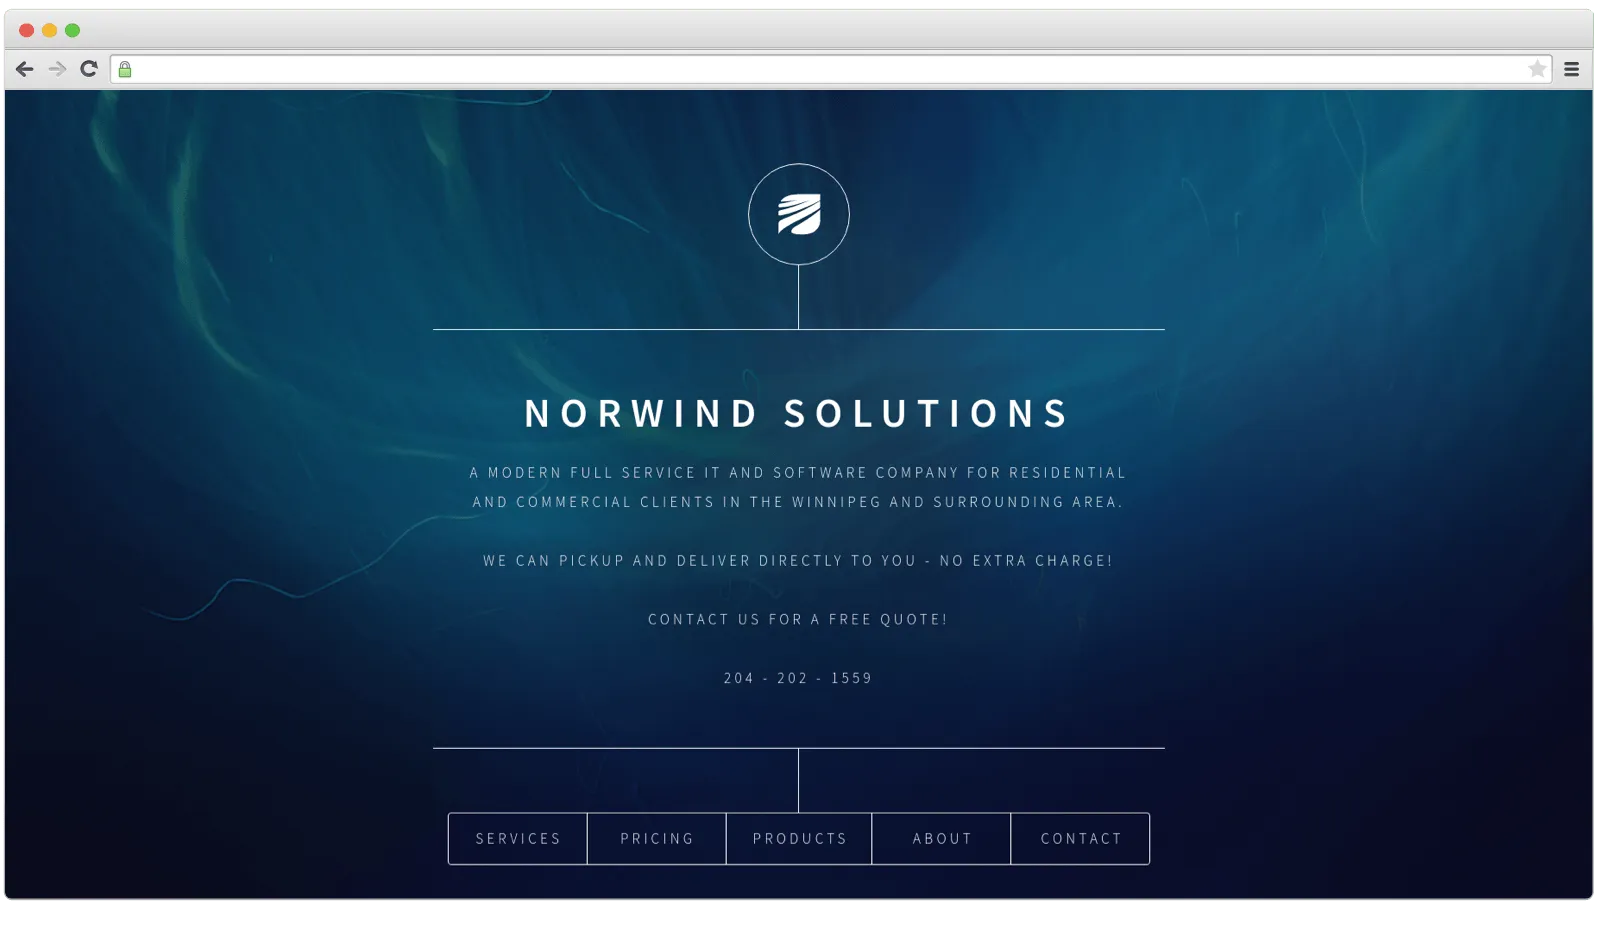 Norwind Solutions